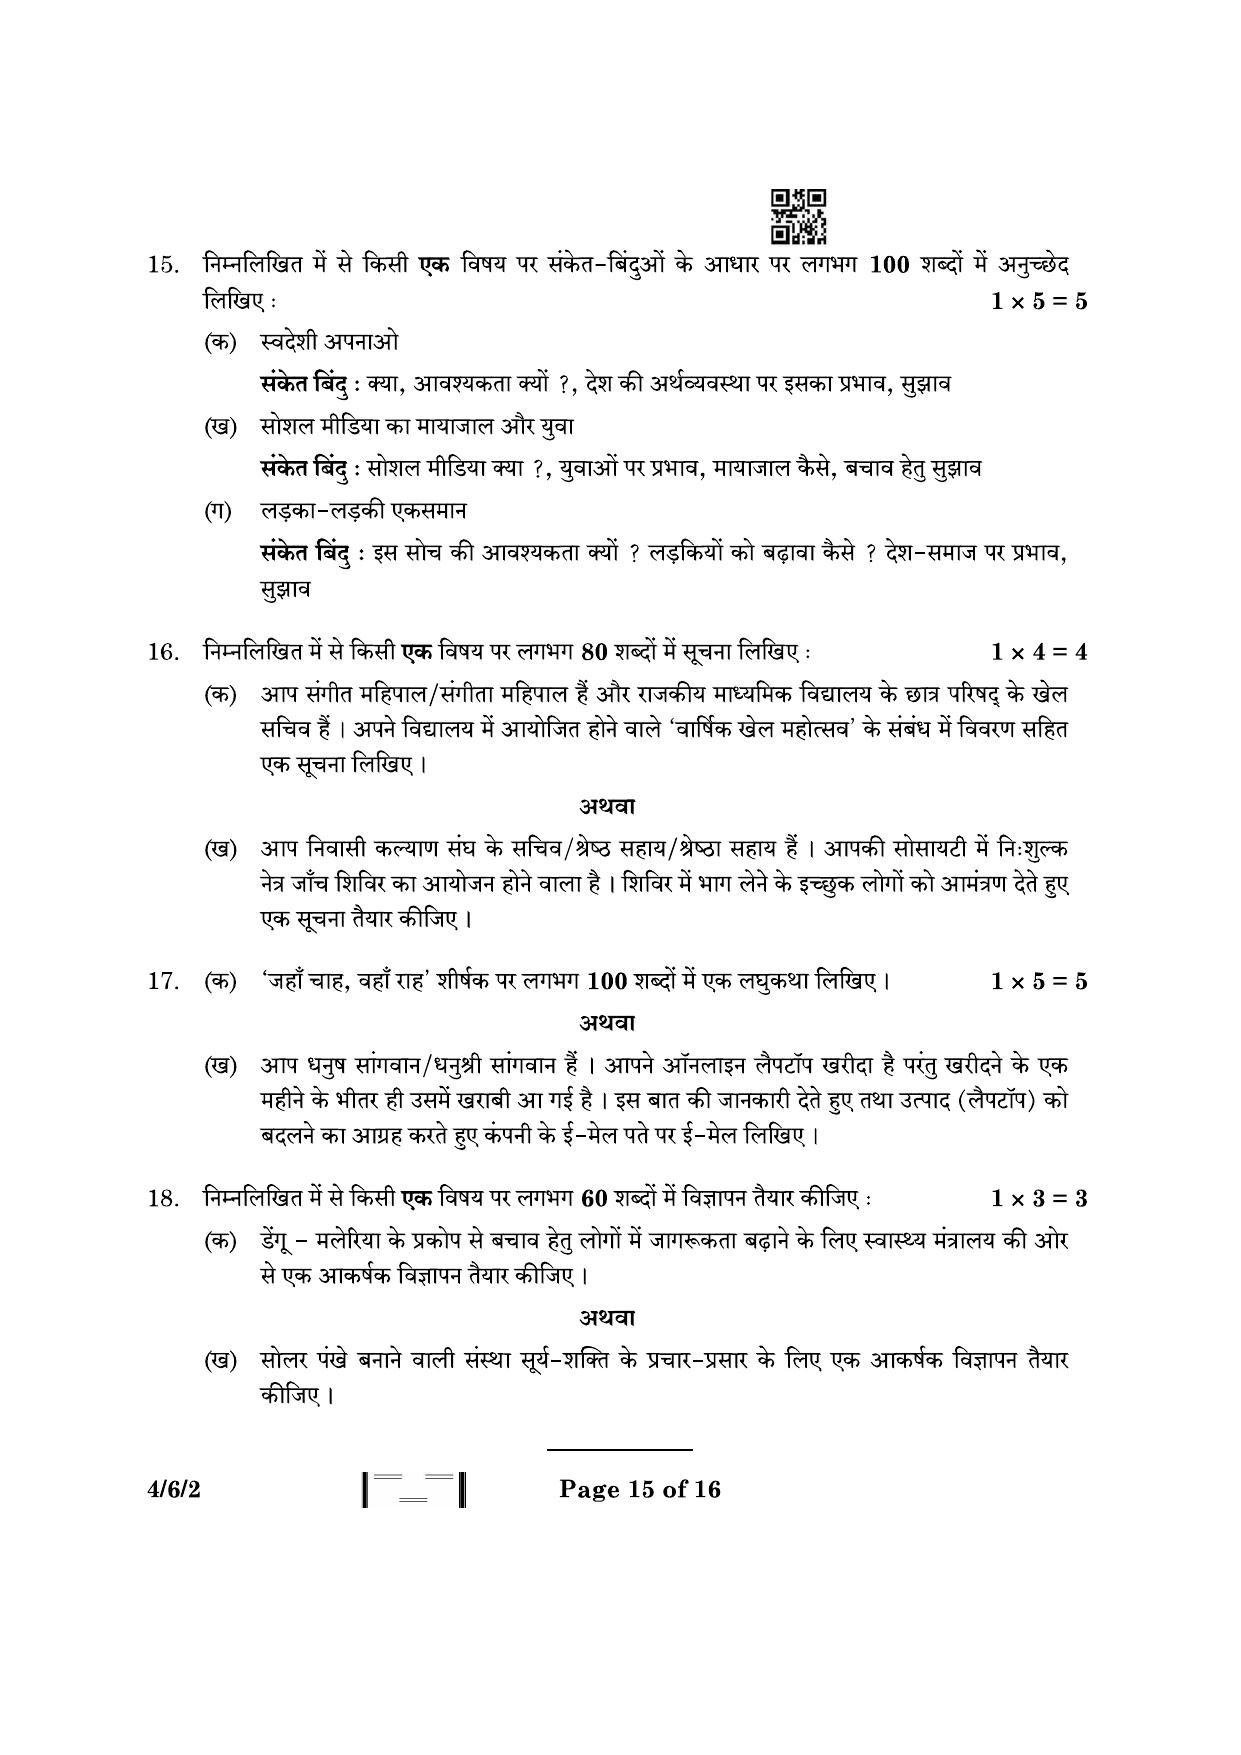 CBSE Class 10 4-6-2 Hindi B 2023 Question Paper - Page 15